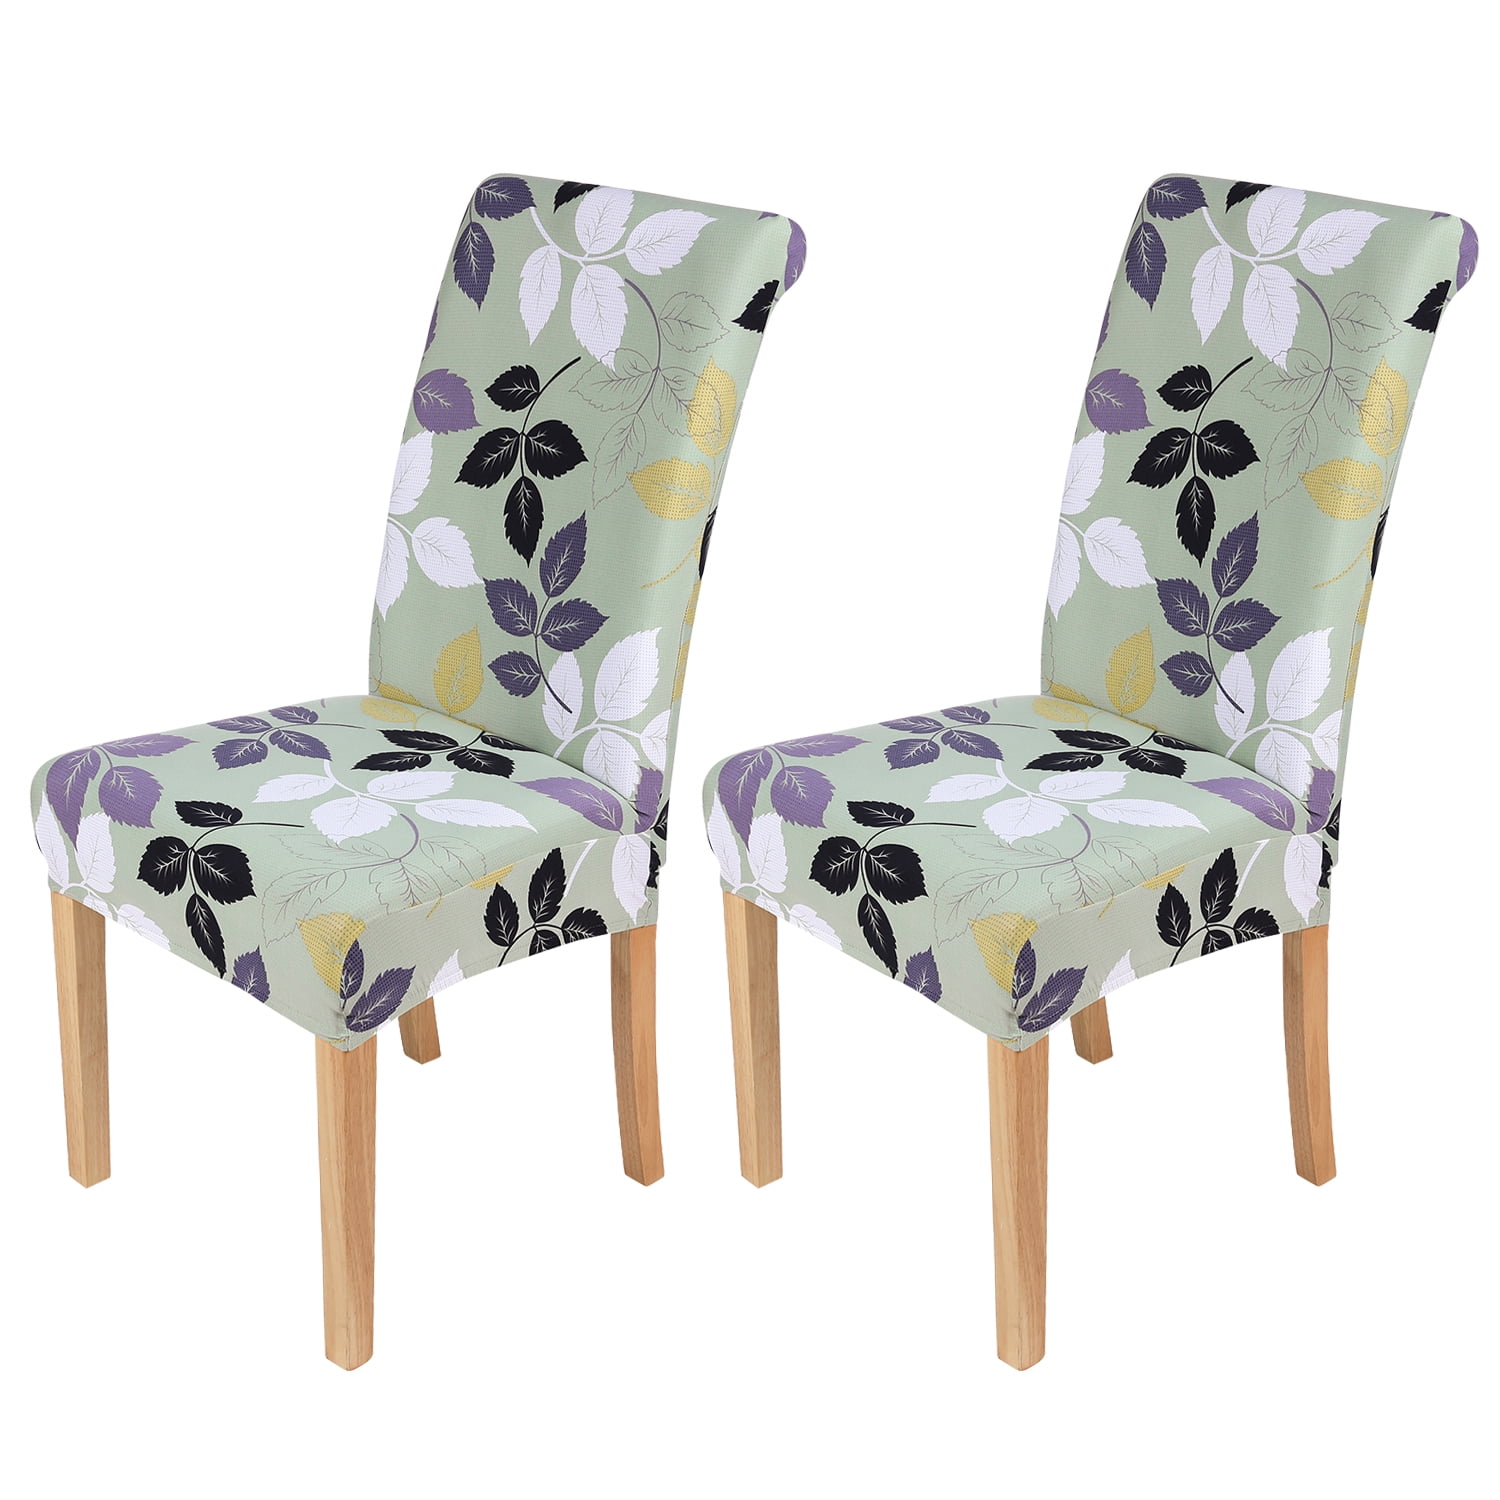 FLORAL/BIRD PATTERN SET OF 4 NEW WORLD TAPESTRY RANGE FABRIC TIE ON CHAIR SEAT PADS For Seats Approx.14 Wide X 14 Deep